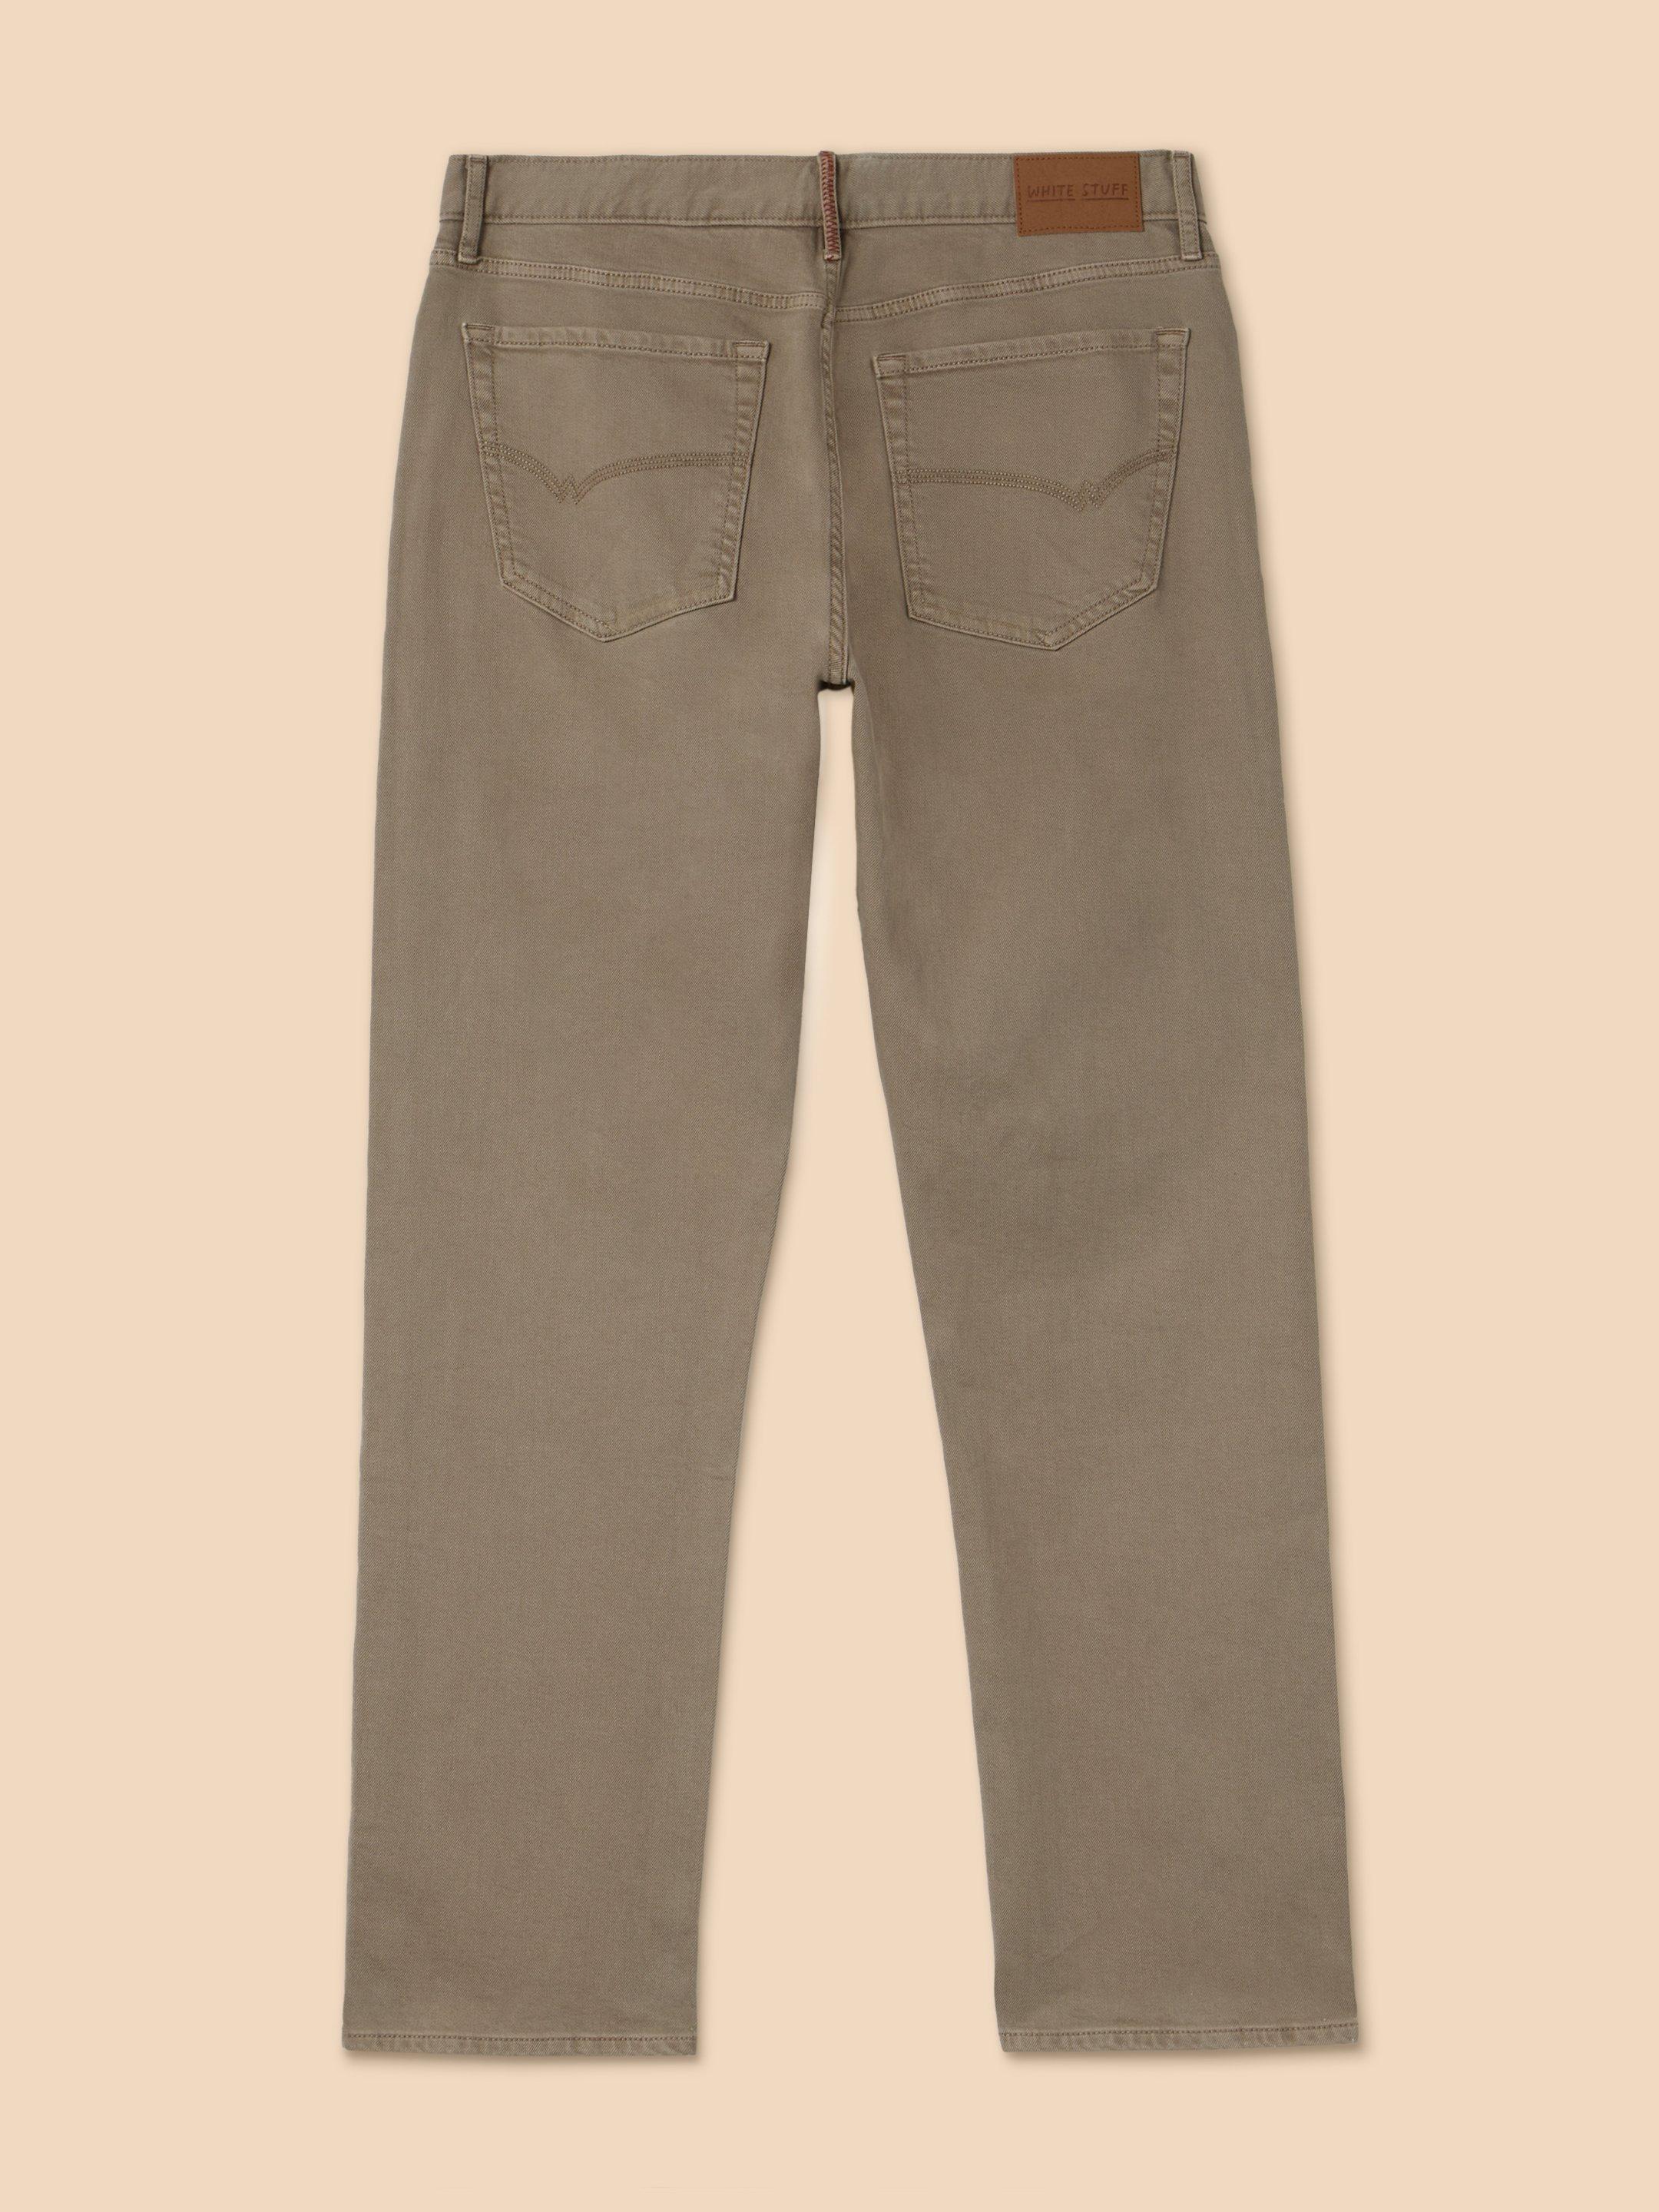 Eastwood Straight Jean in LGT NAT - FLAT BACK